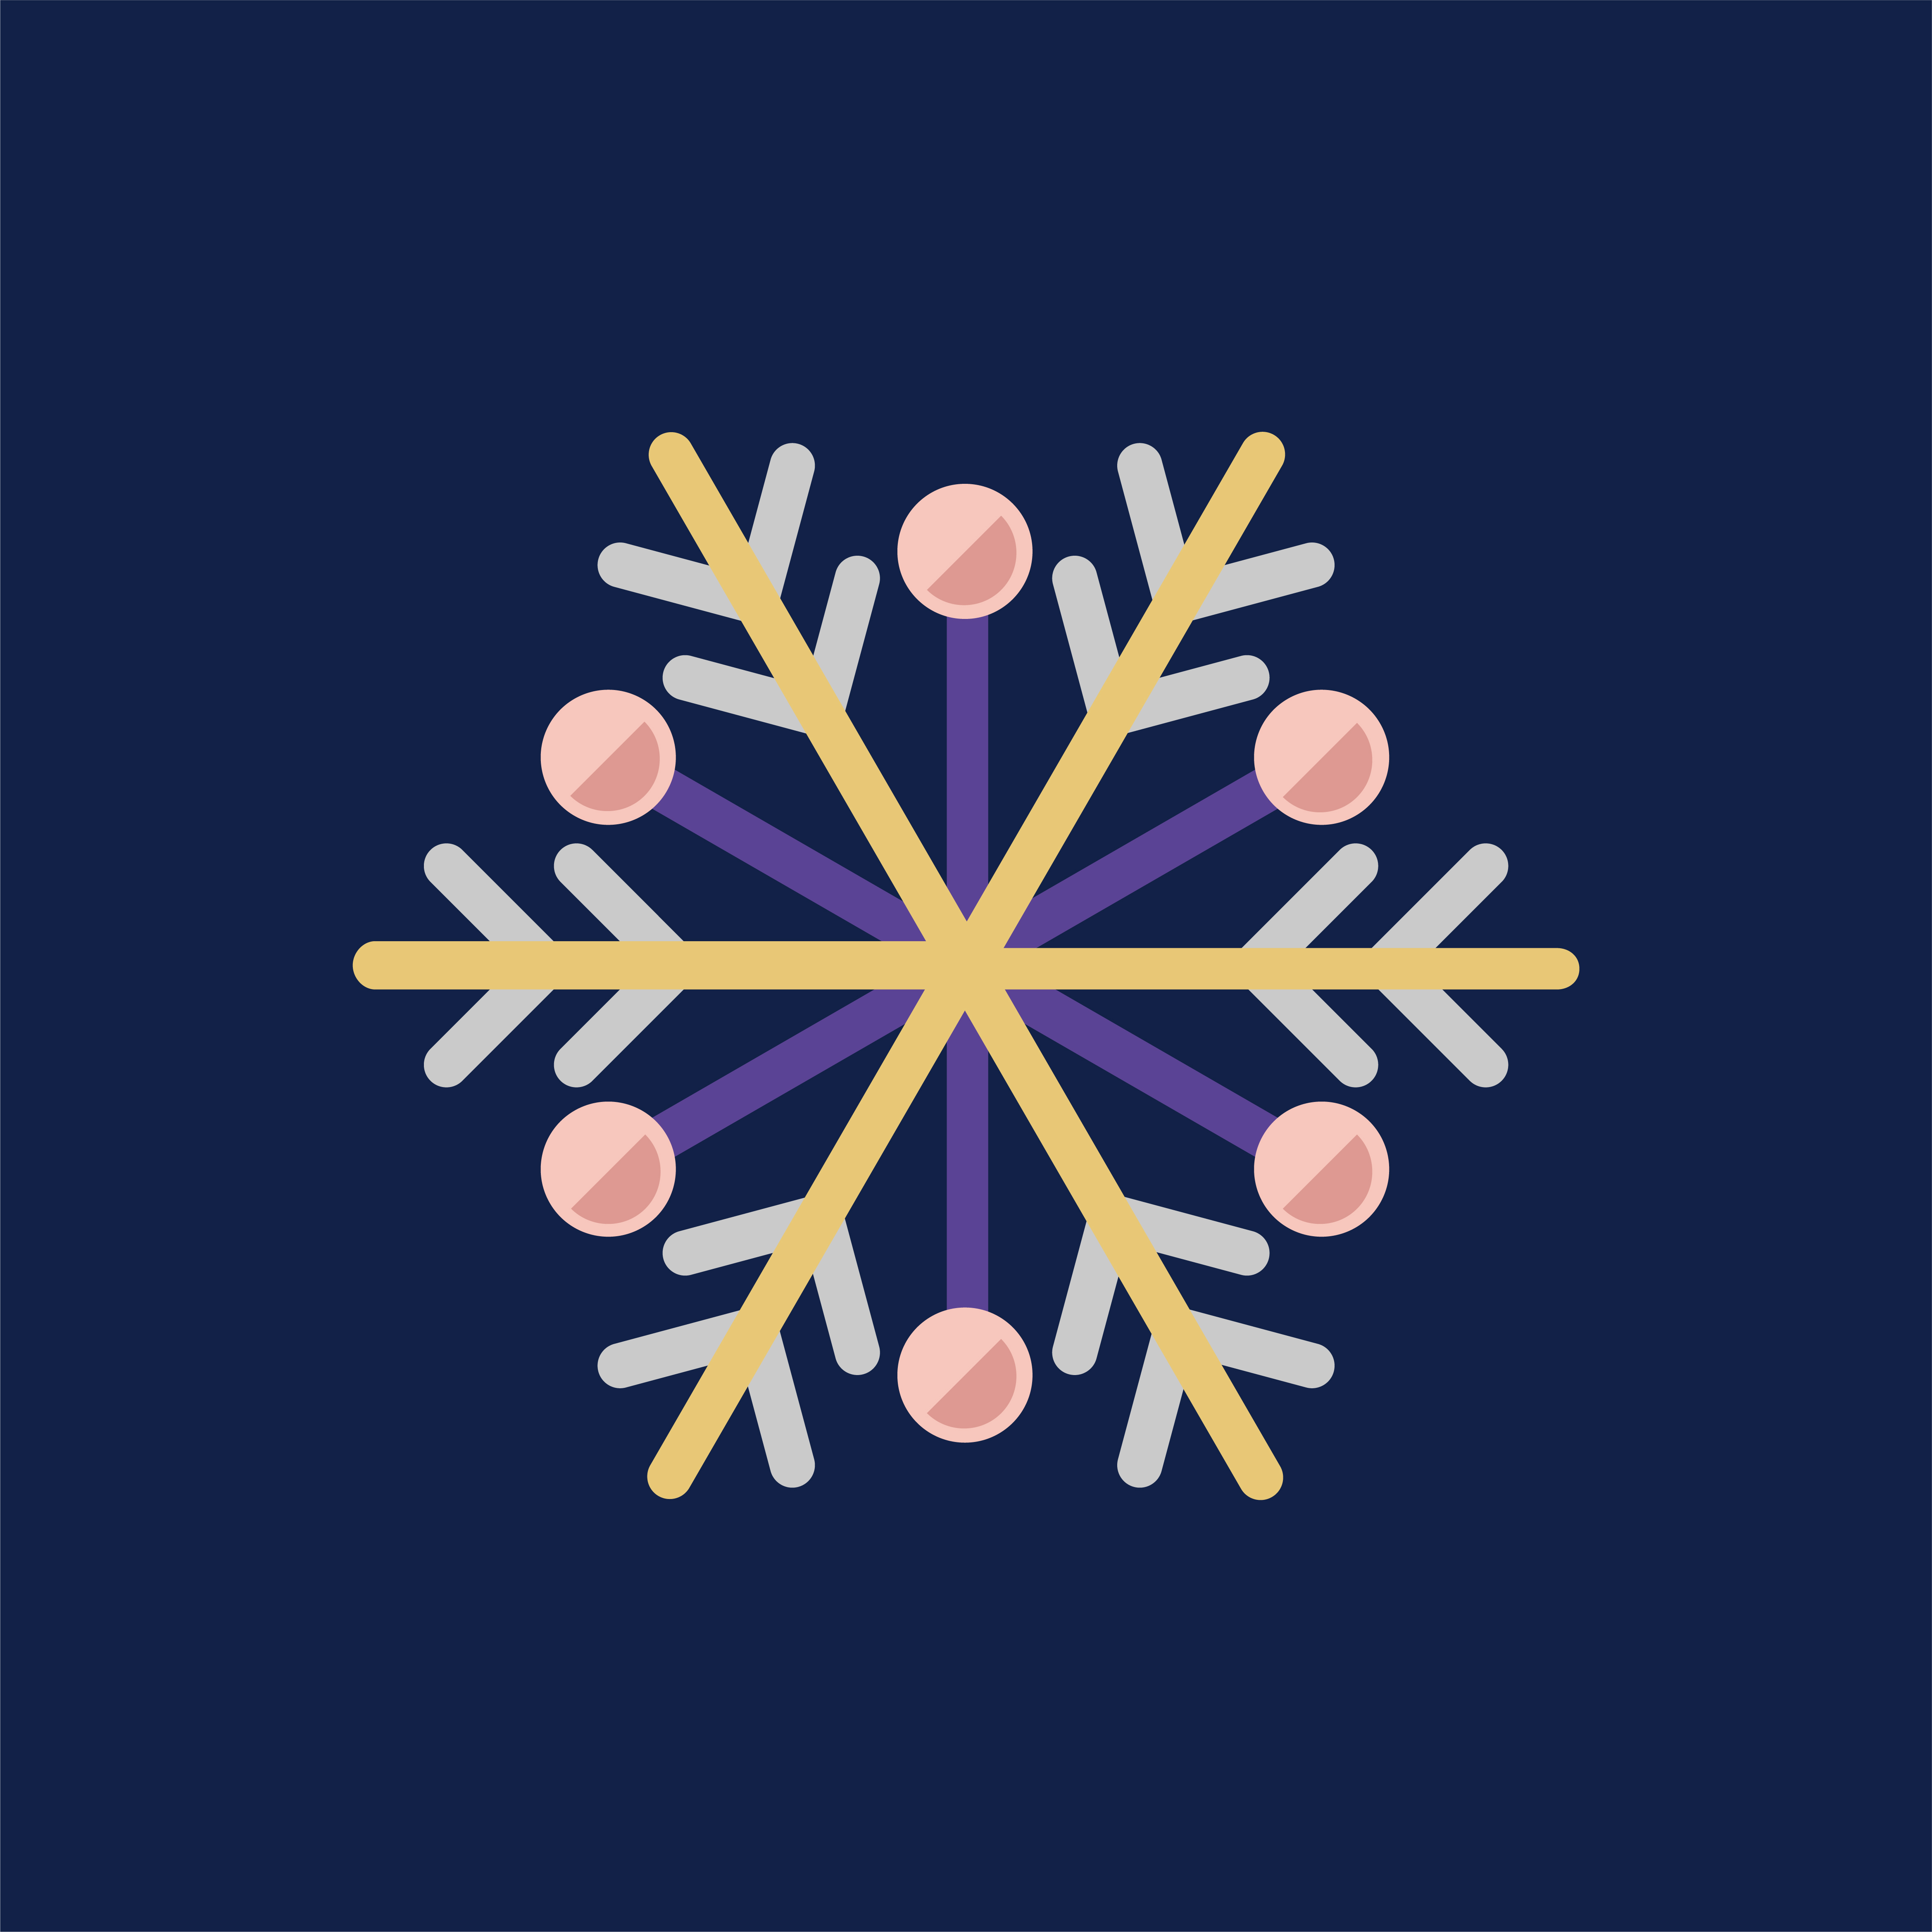 Illustration of a colorful snowflake pattern - Download Free Vectors